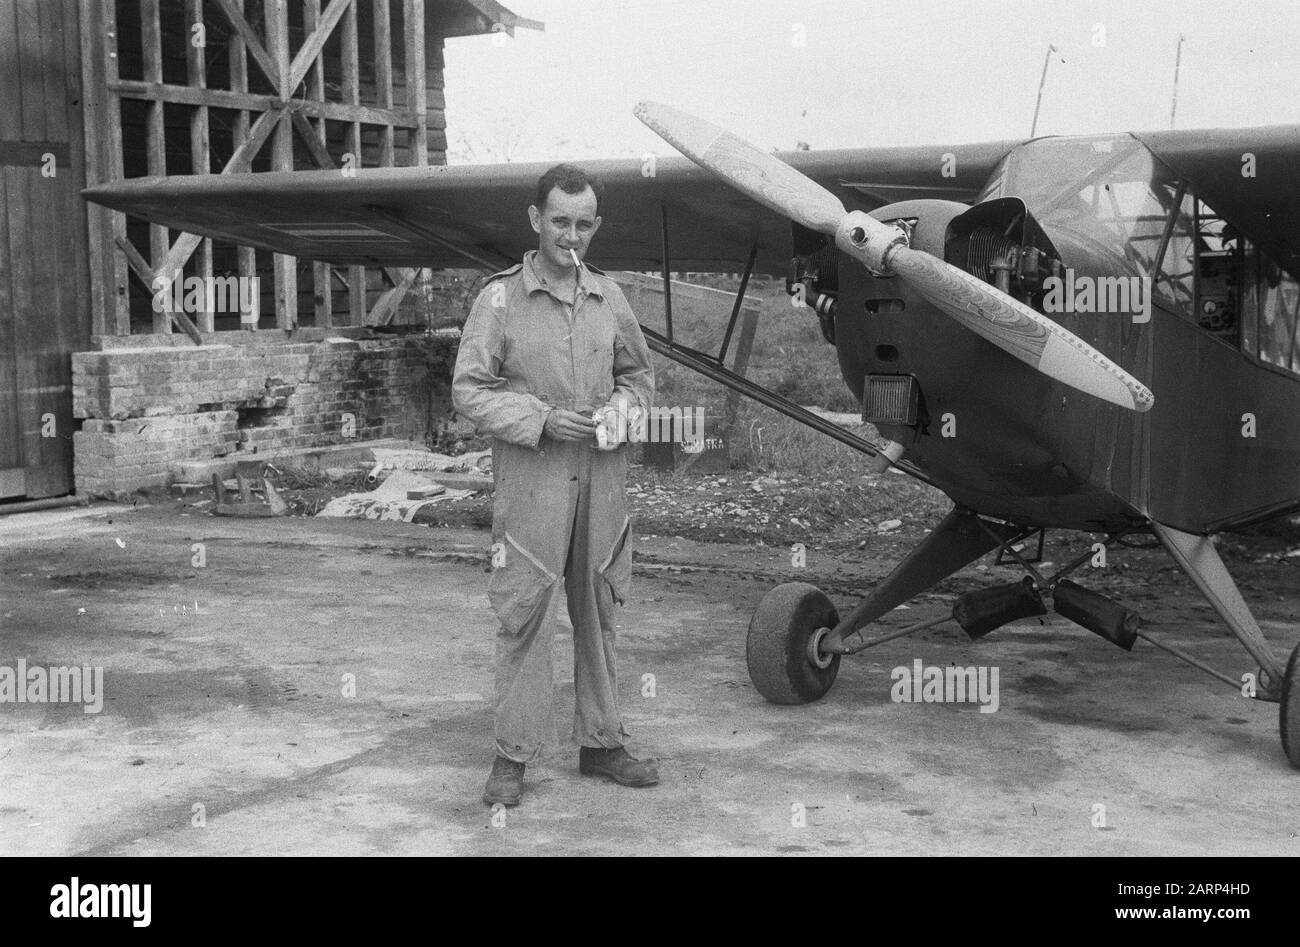 Flyman poses bji Piper L-4J Cub Grashopper Annotation: On the block or box behind the plane stands Sumatra. Registration number: PC4-006. This aircraft was later renumbered R-306 and was transferred to the Indonesian Air Force (AURIS) in 1950. Date: 1946 Location: Indonesia, Dutch East Indies Stock Photo